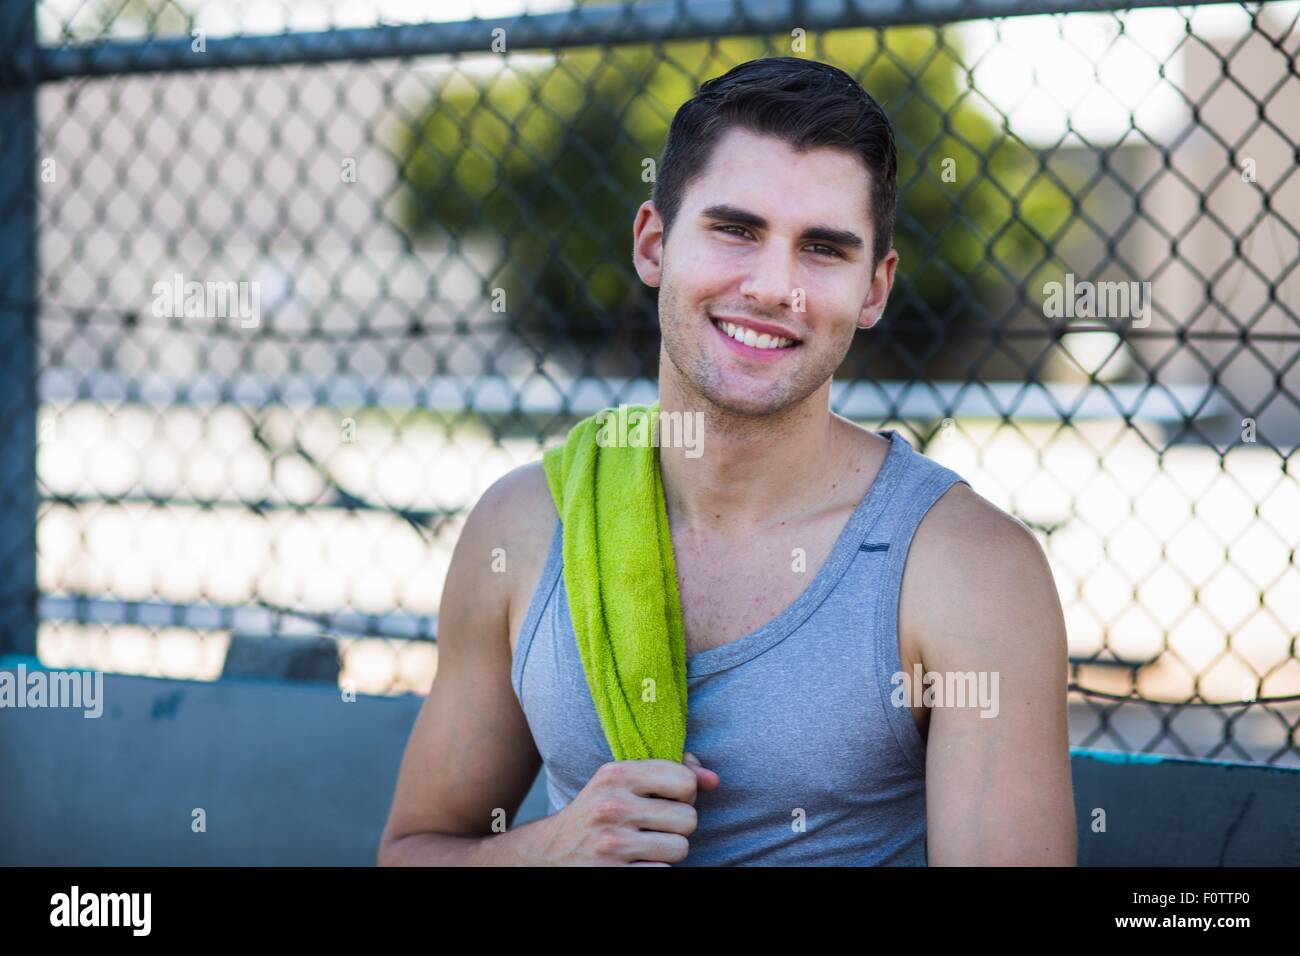 Portrait of smiling young male basketball player with towel on shoulder Stock Photo